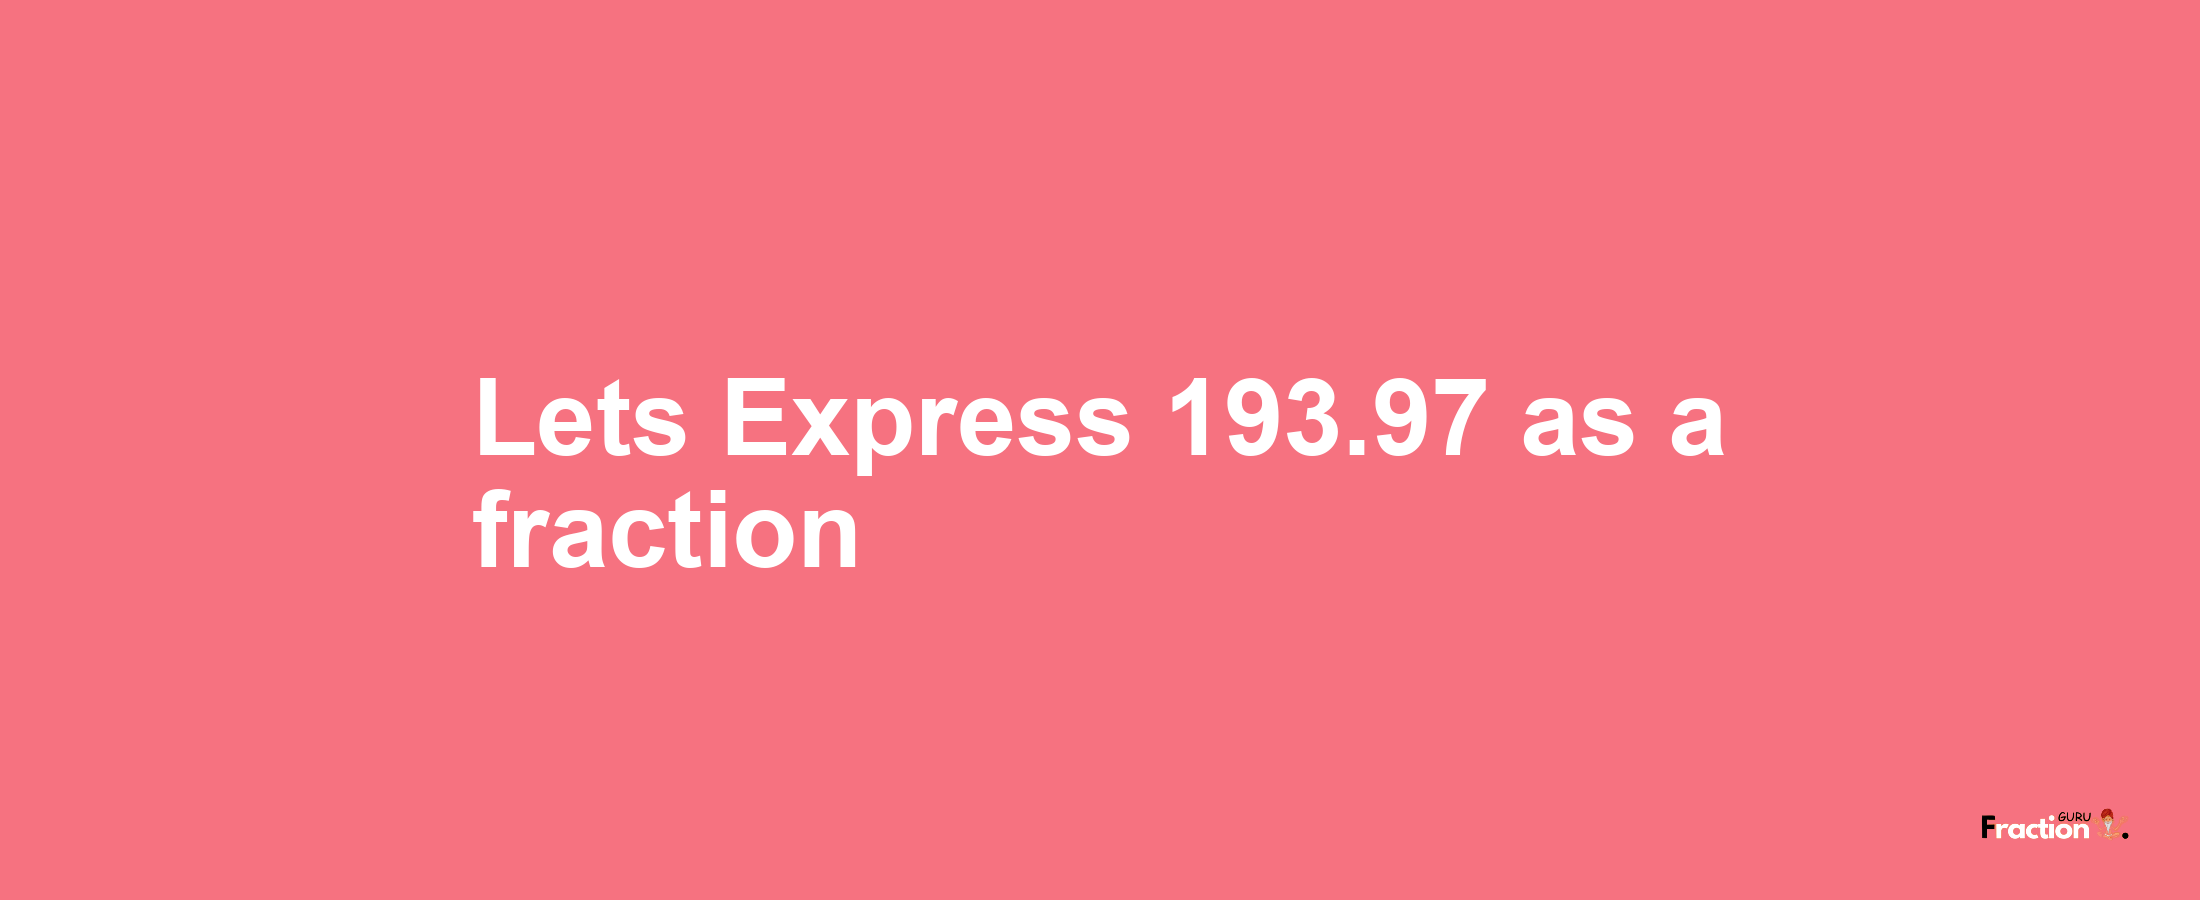 Lets Express 193.97 as afraction